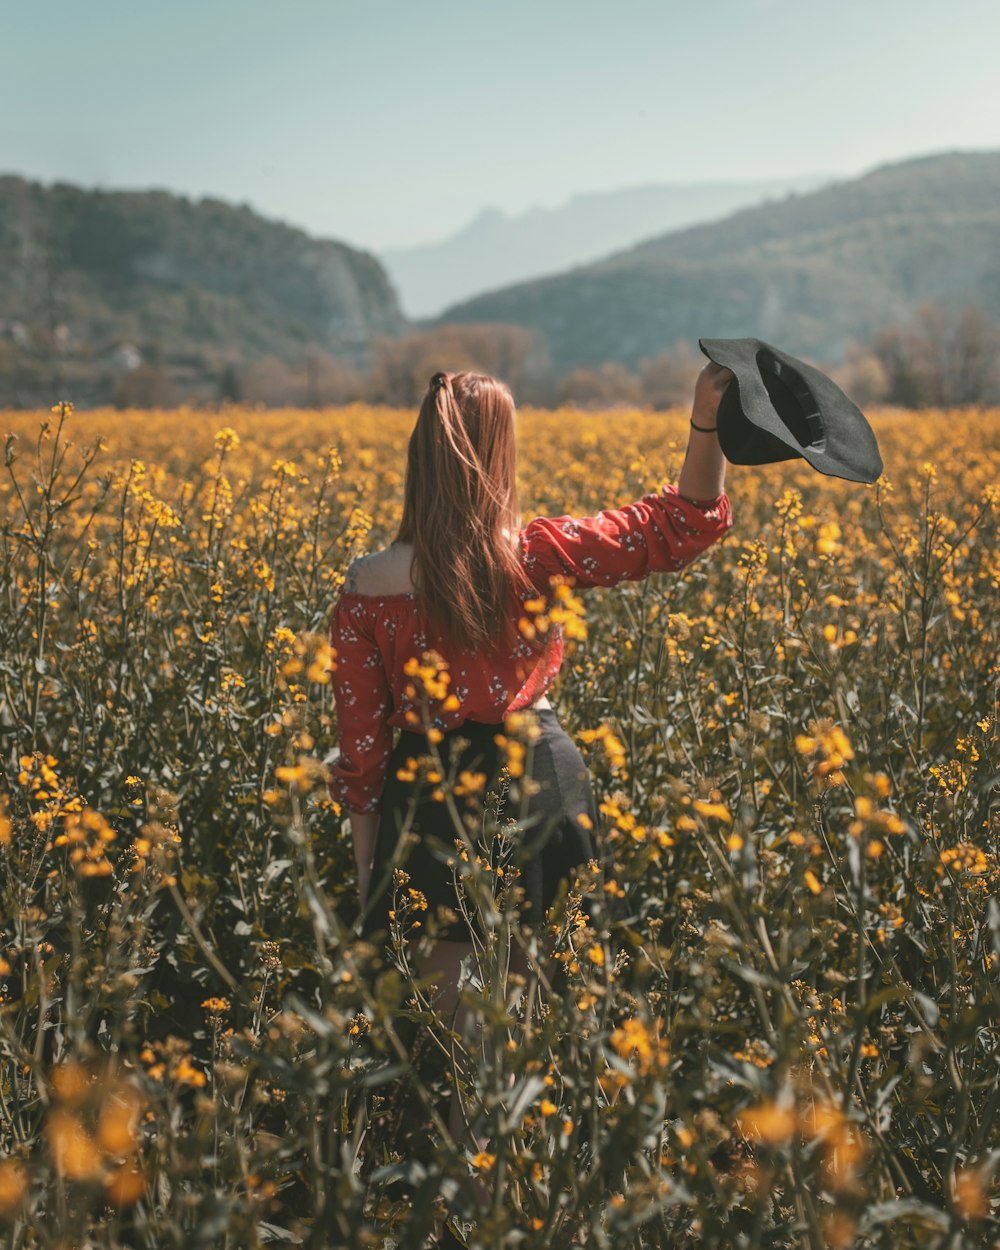 Woman In Flower Field Pictures | Download Free Images on Unsplash